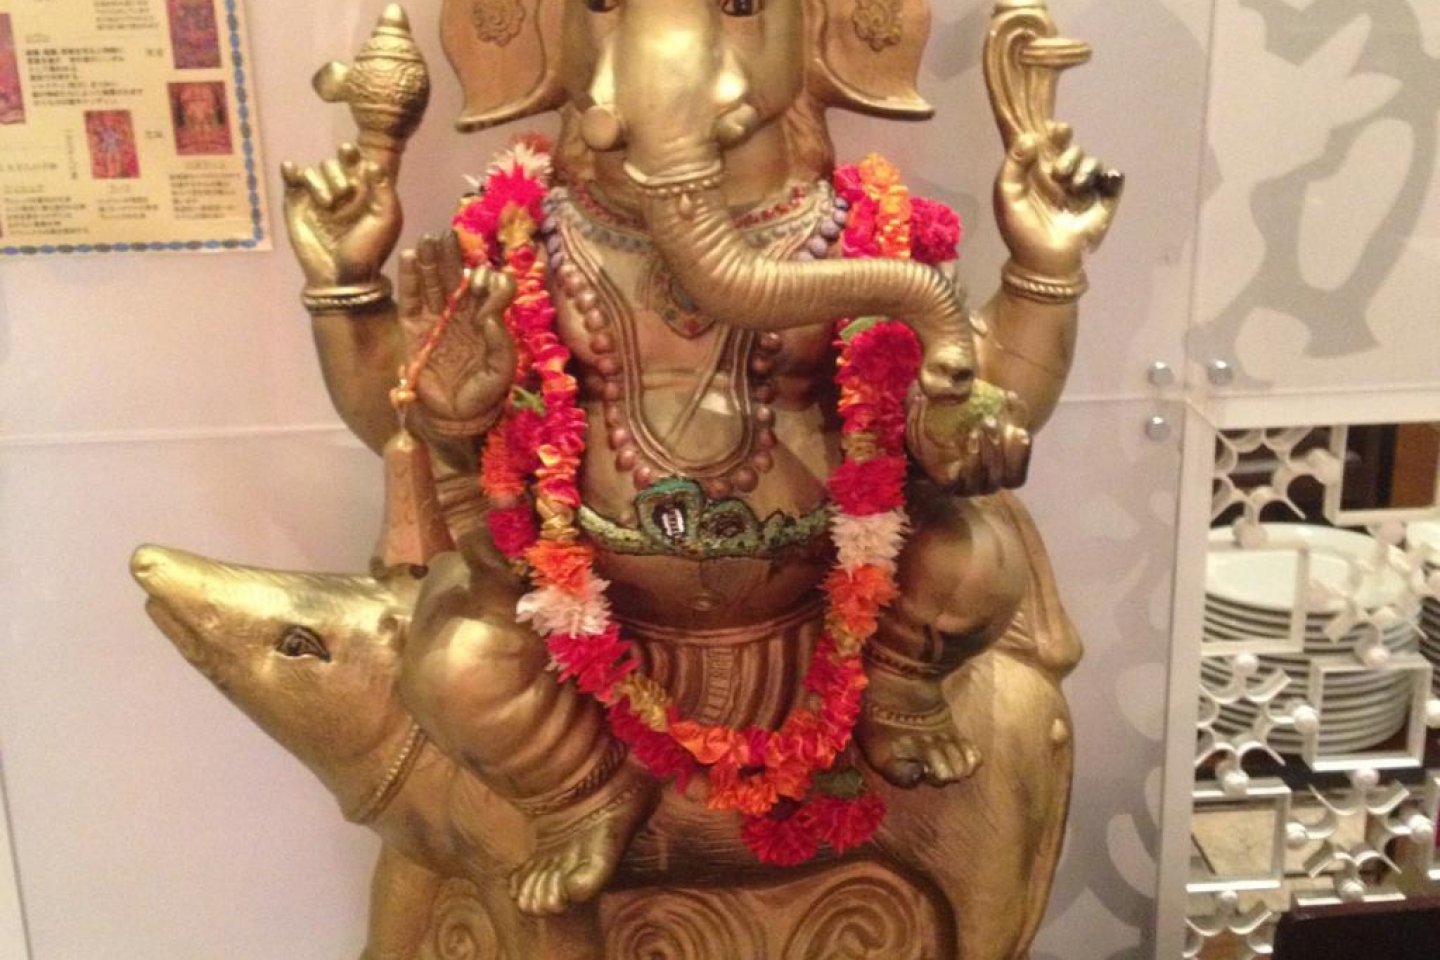 Ganesh idol welcomes restaurant goers at the entrance